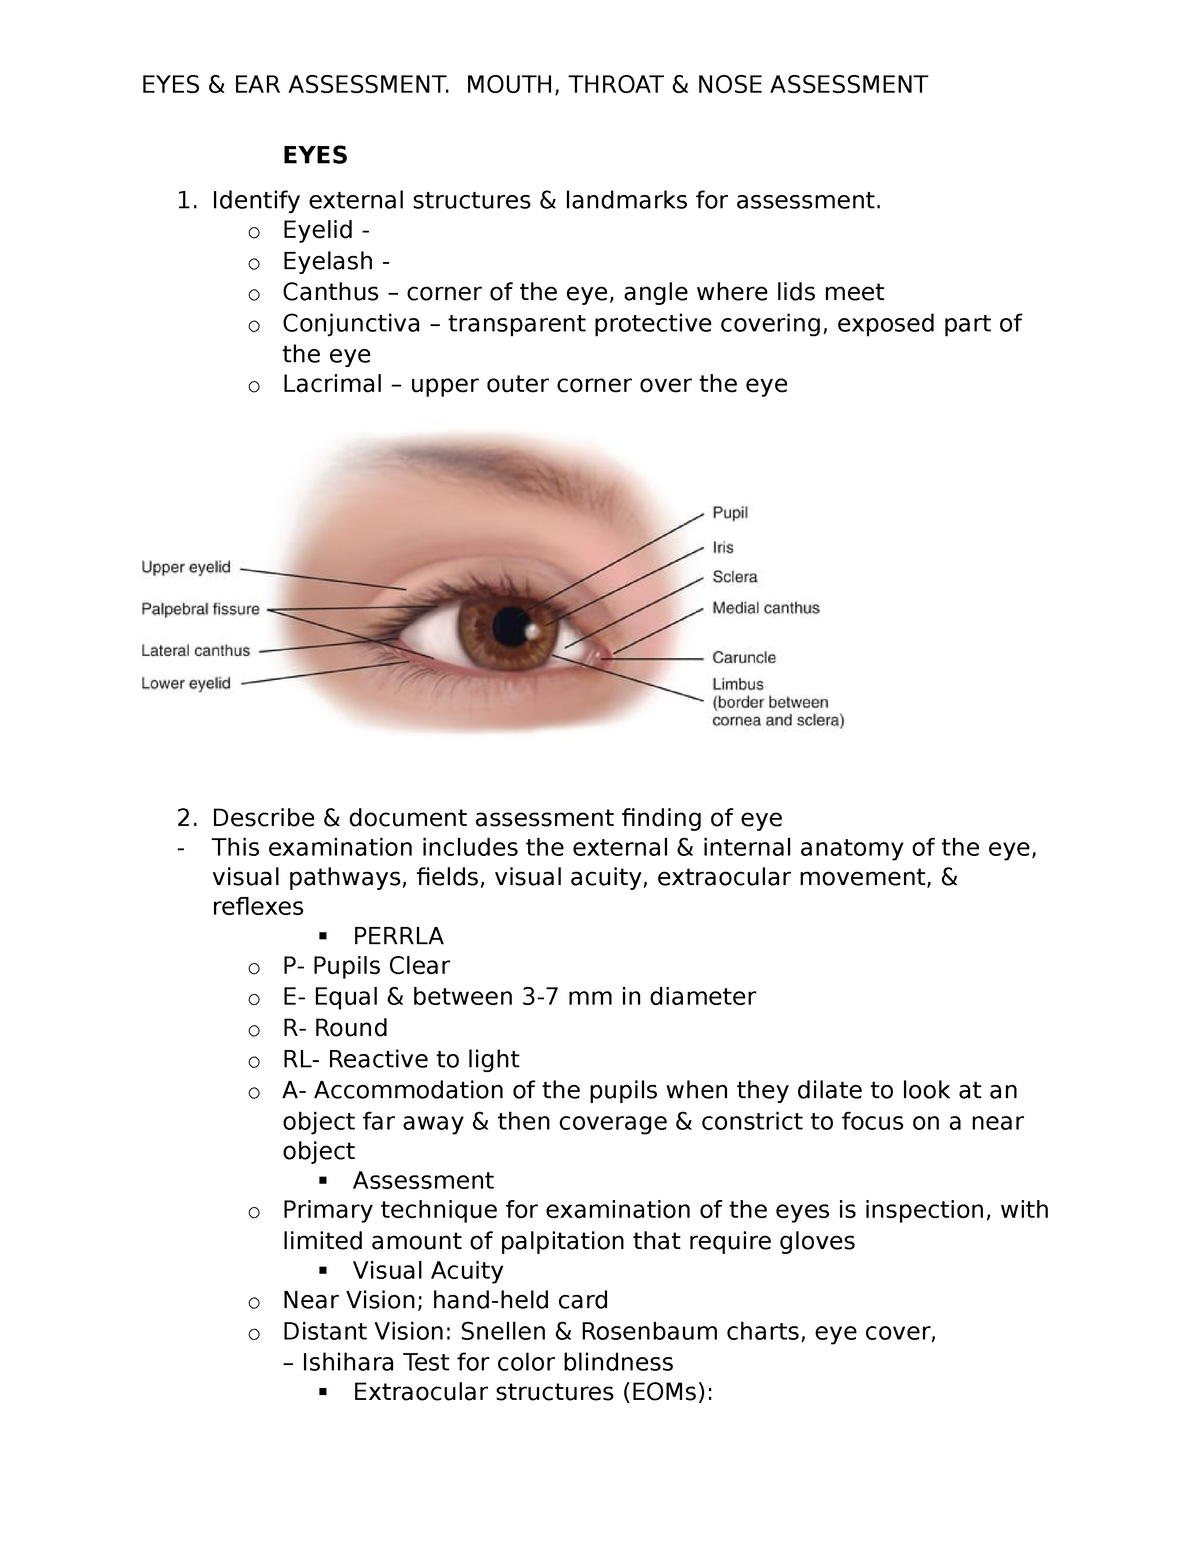 Eyes Ears Mouth Throat Nose Unit 2 Health Assessment Eyes Identify